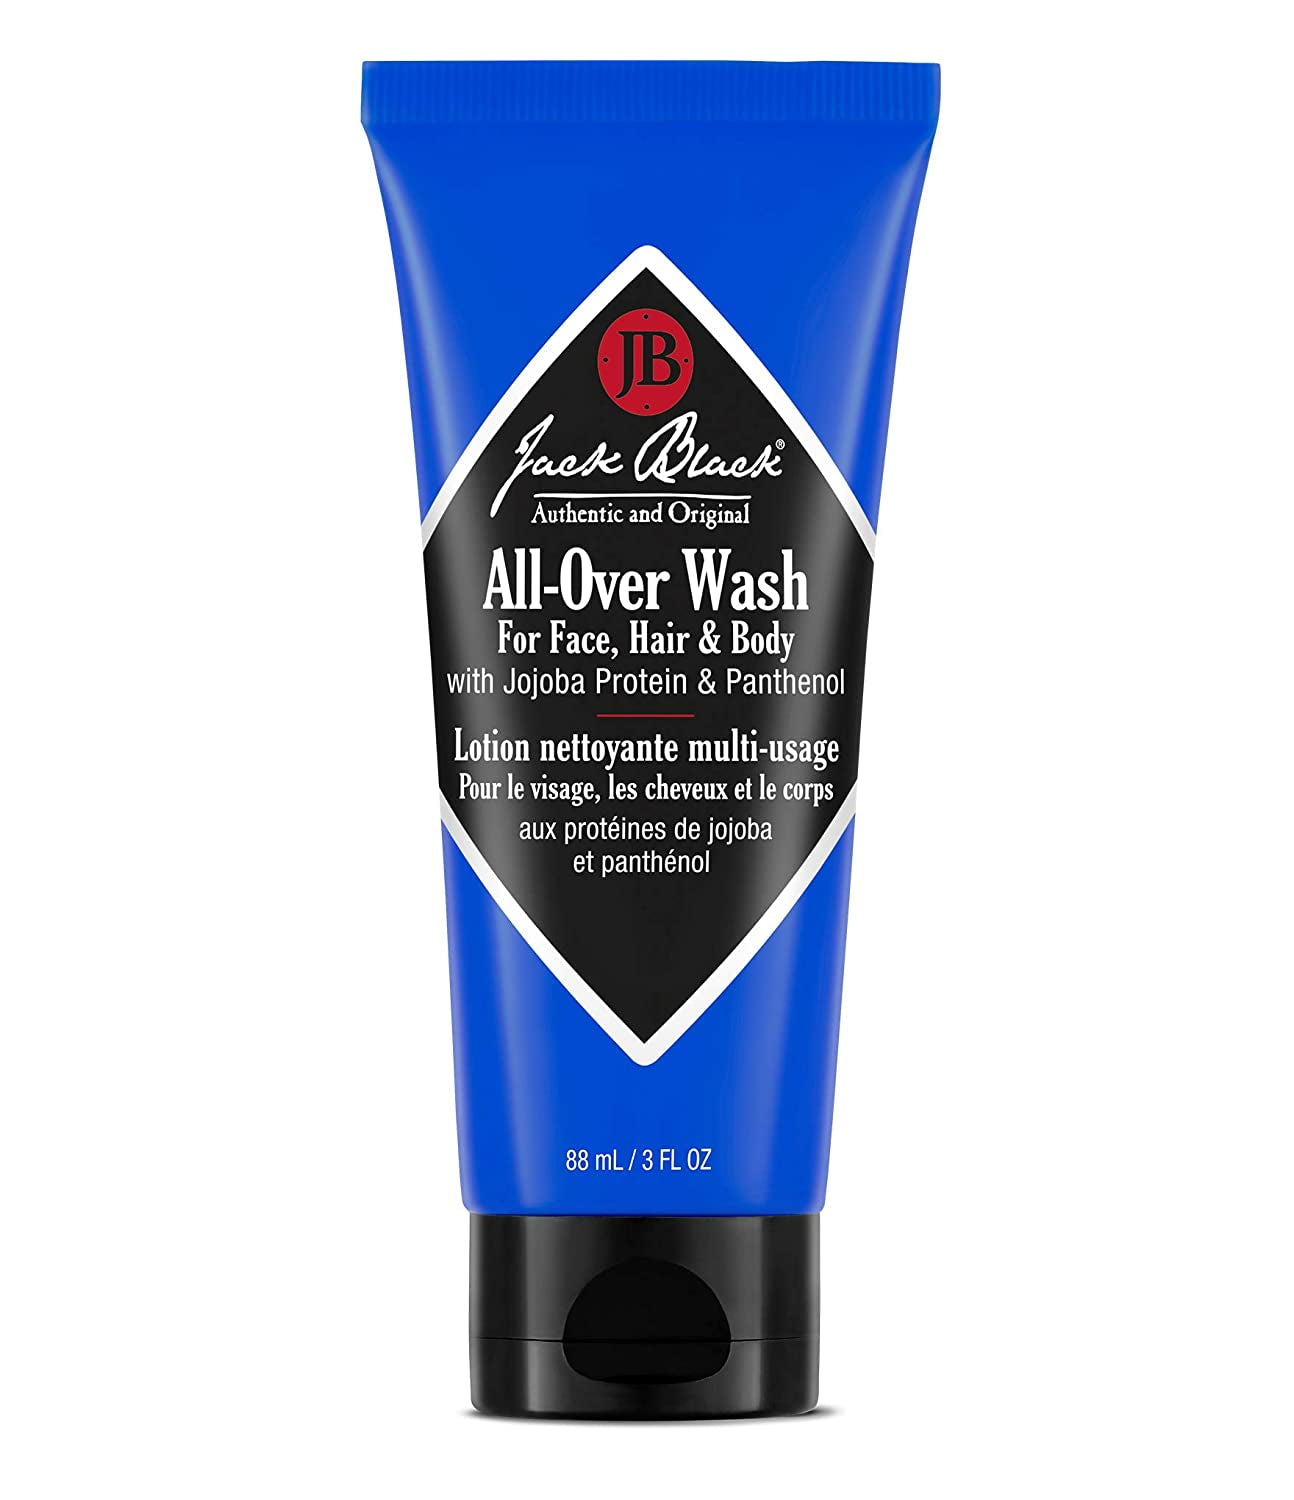 All-Over Wash for Face, Hair & Body, Men’S Body Wash, Hydrating Skincare, Multi-Purpose Men’S Body Cleanser